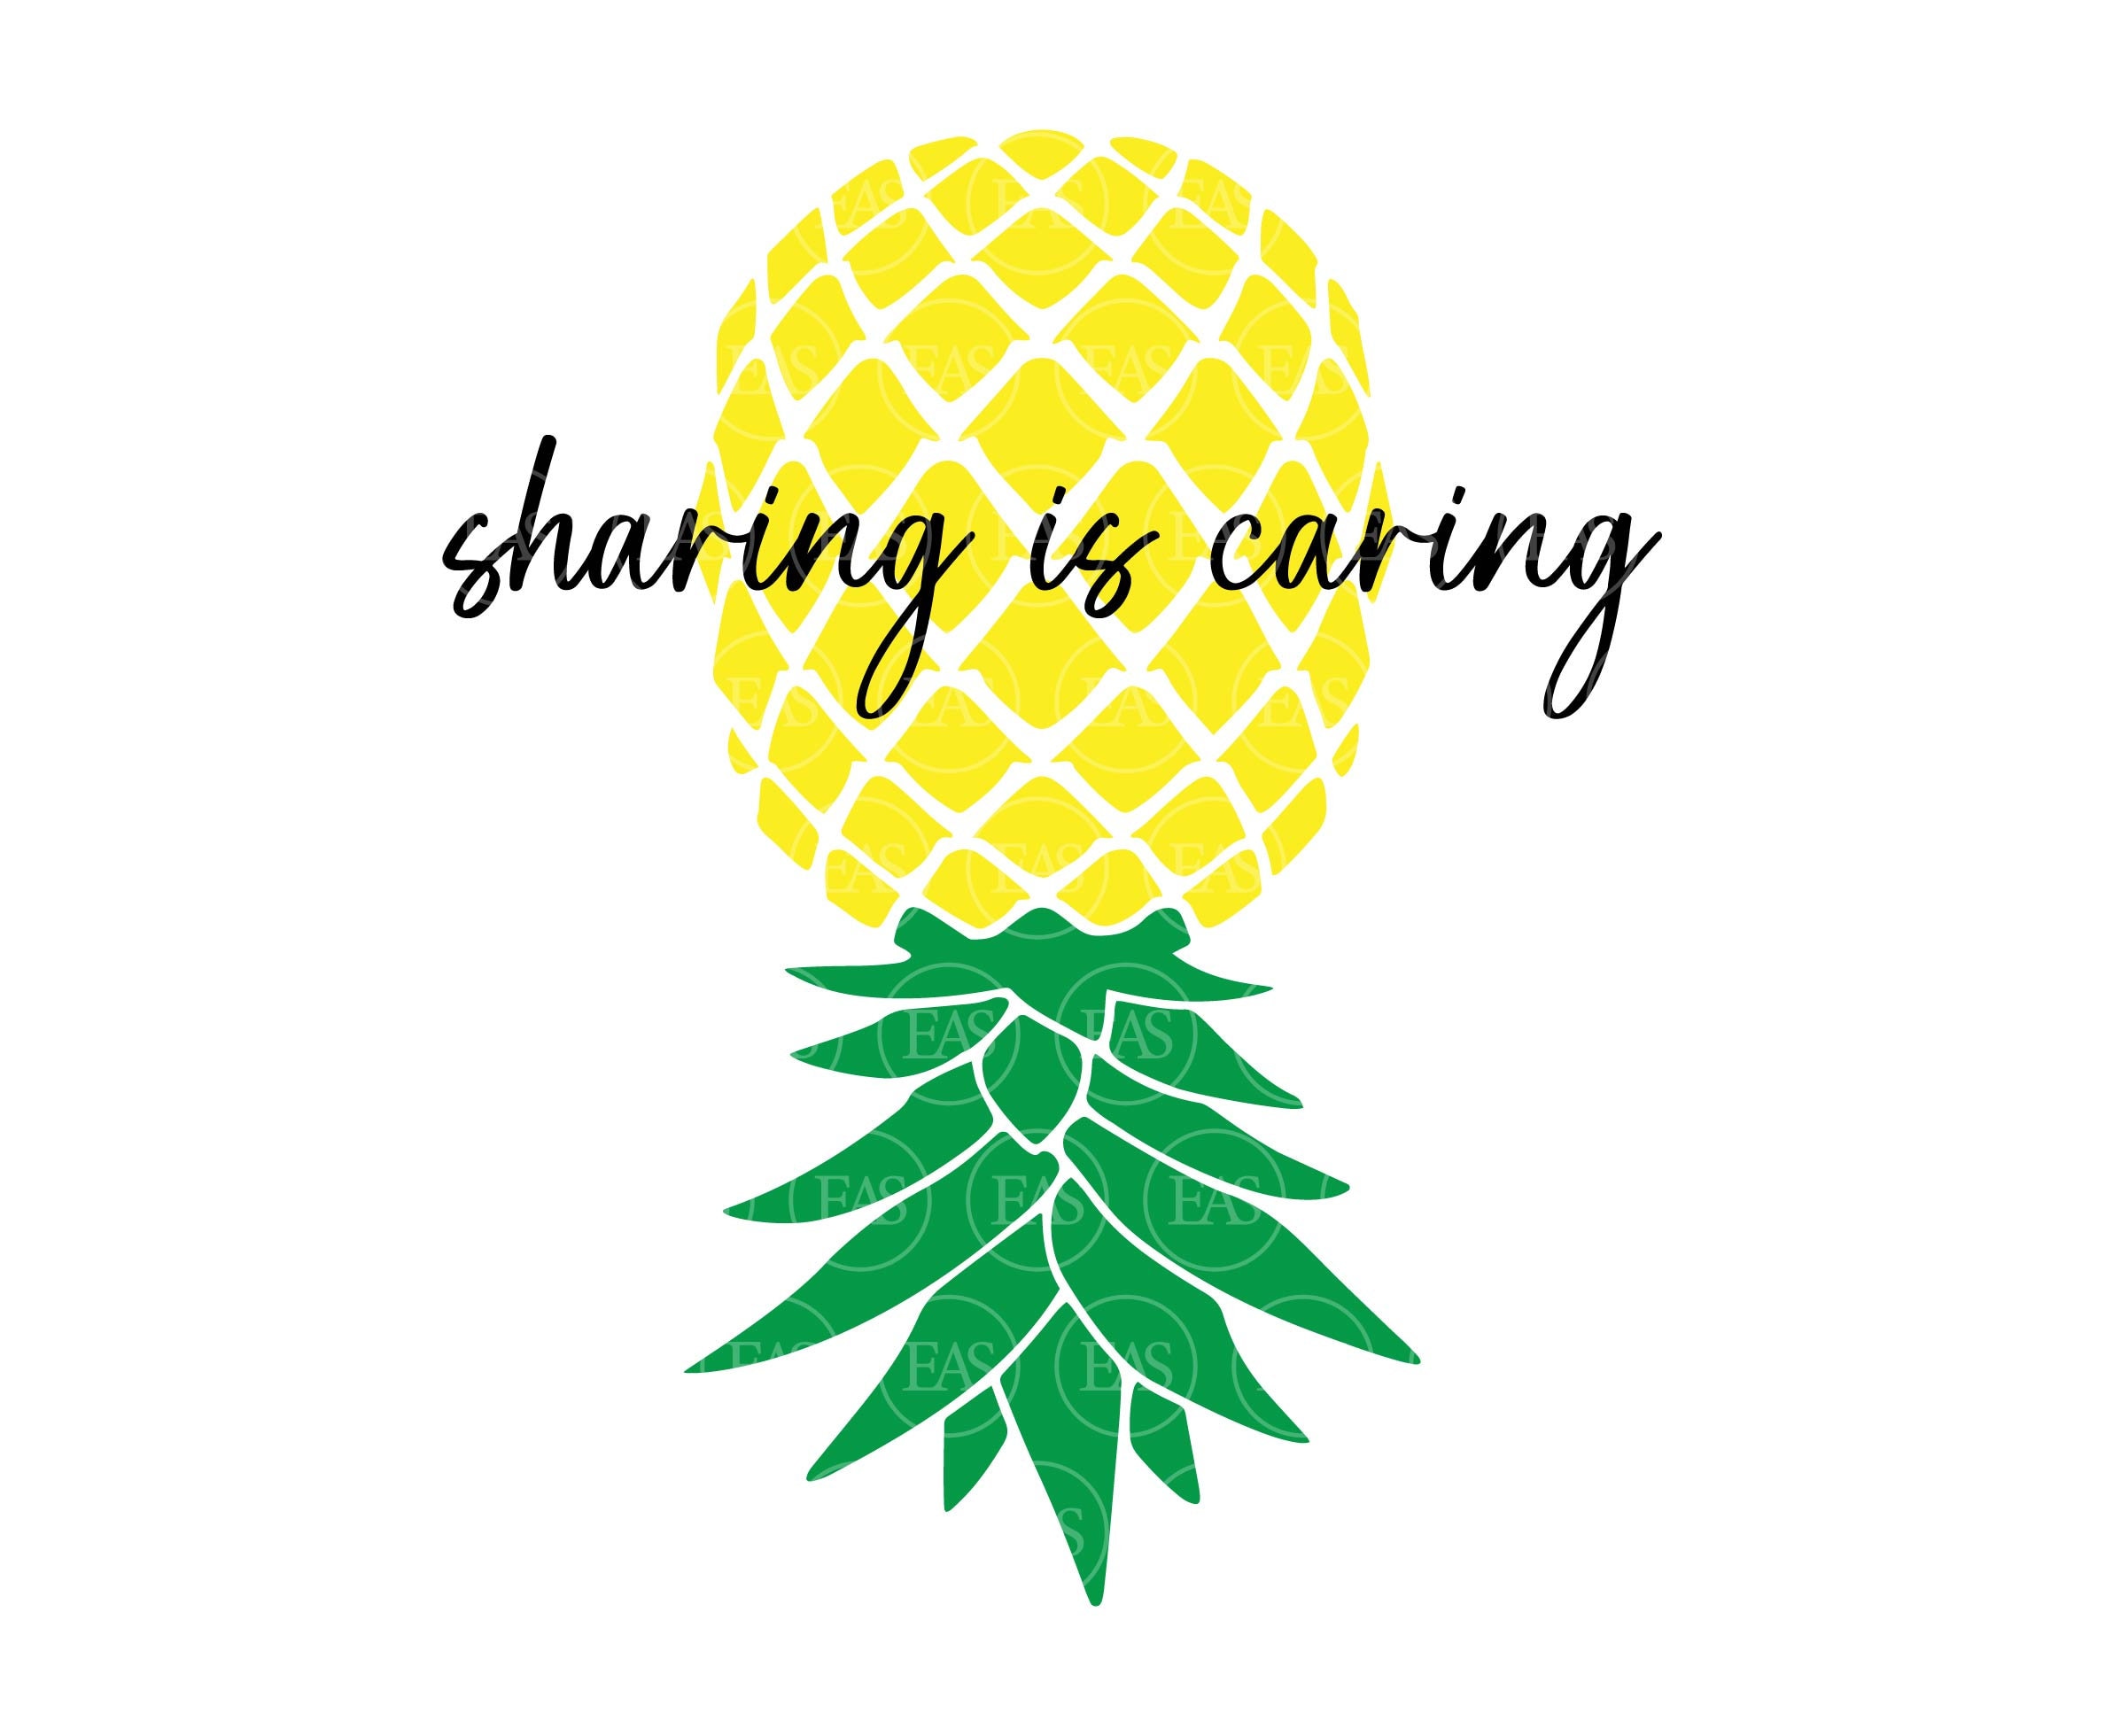 Upside Down Pineapple Svg Sharing is Caring Swinger Couple image